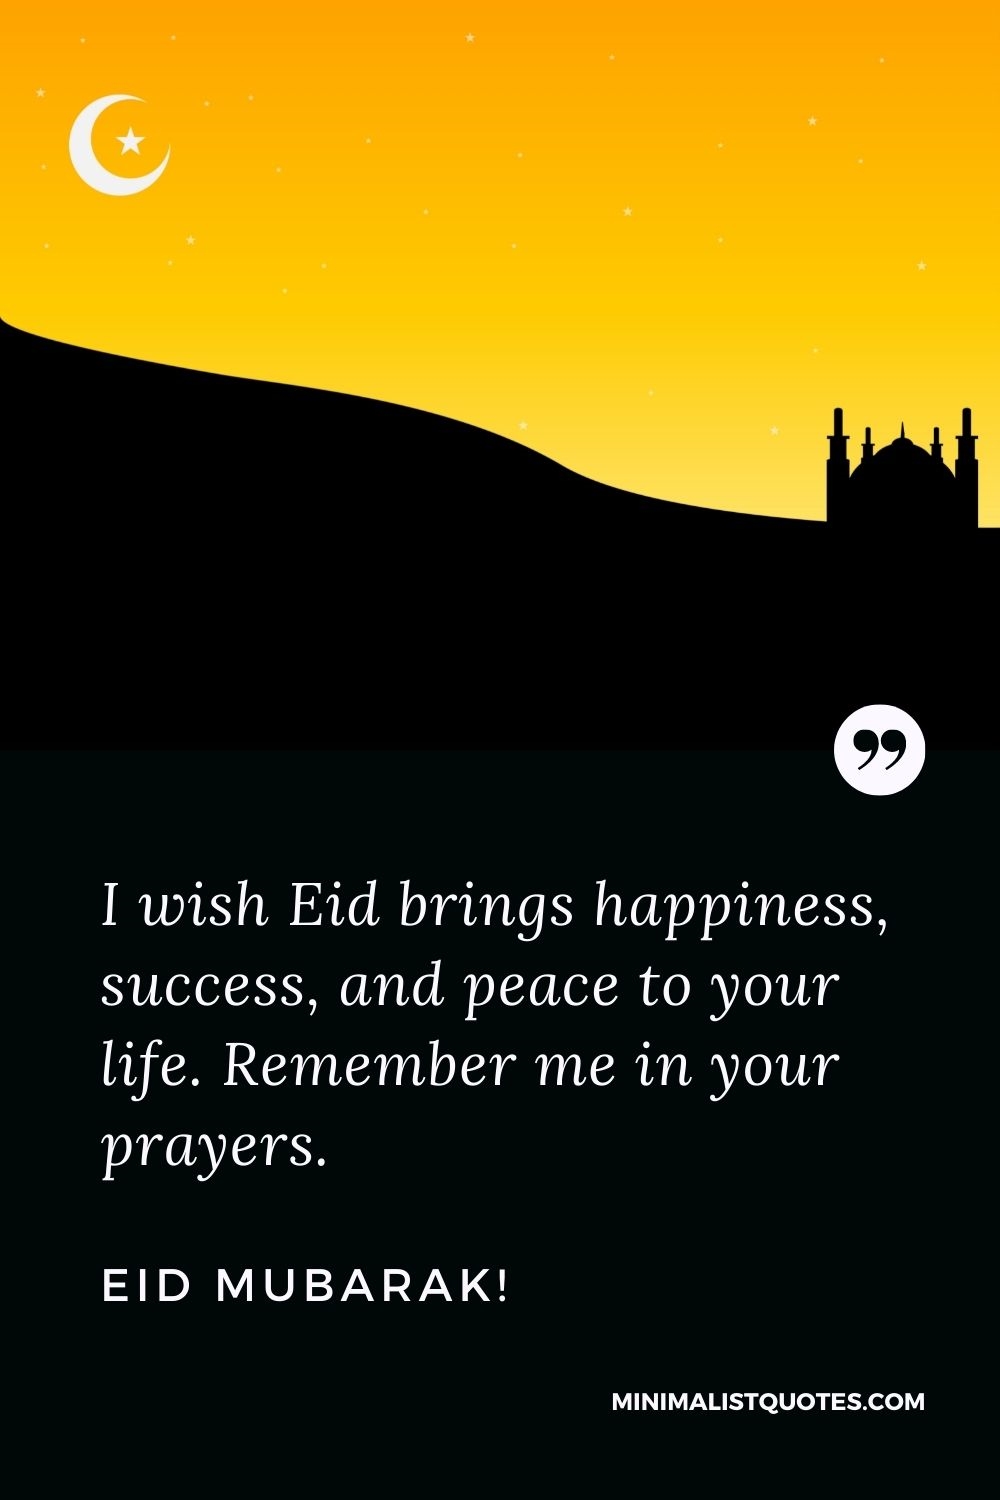 Eid al-Fitr Quote, Message & Wish With Image: I wish Eid brings happiness, success, and peace to your life. Remember me in your prayers. Eid Mubarak!